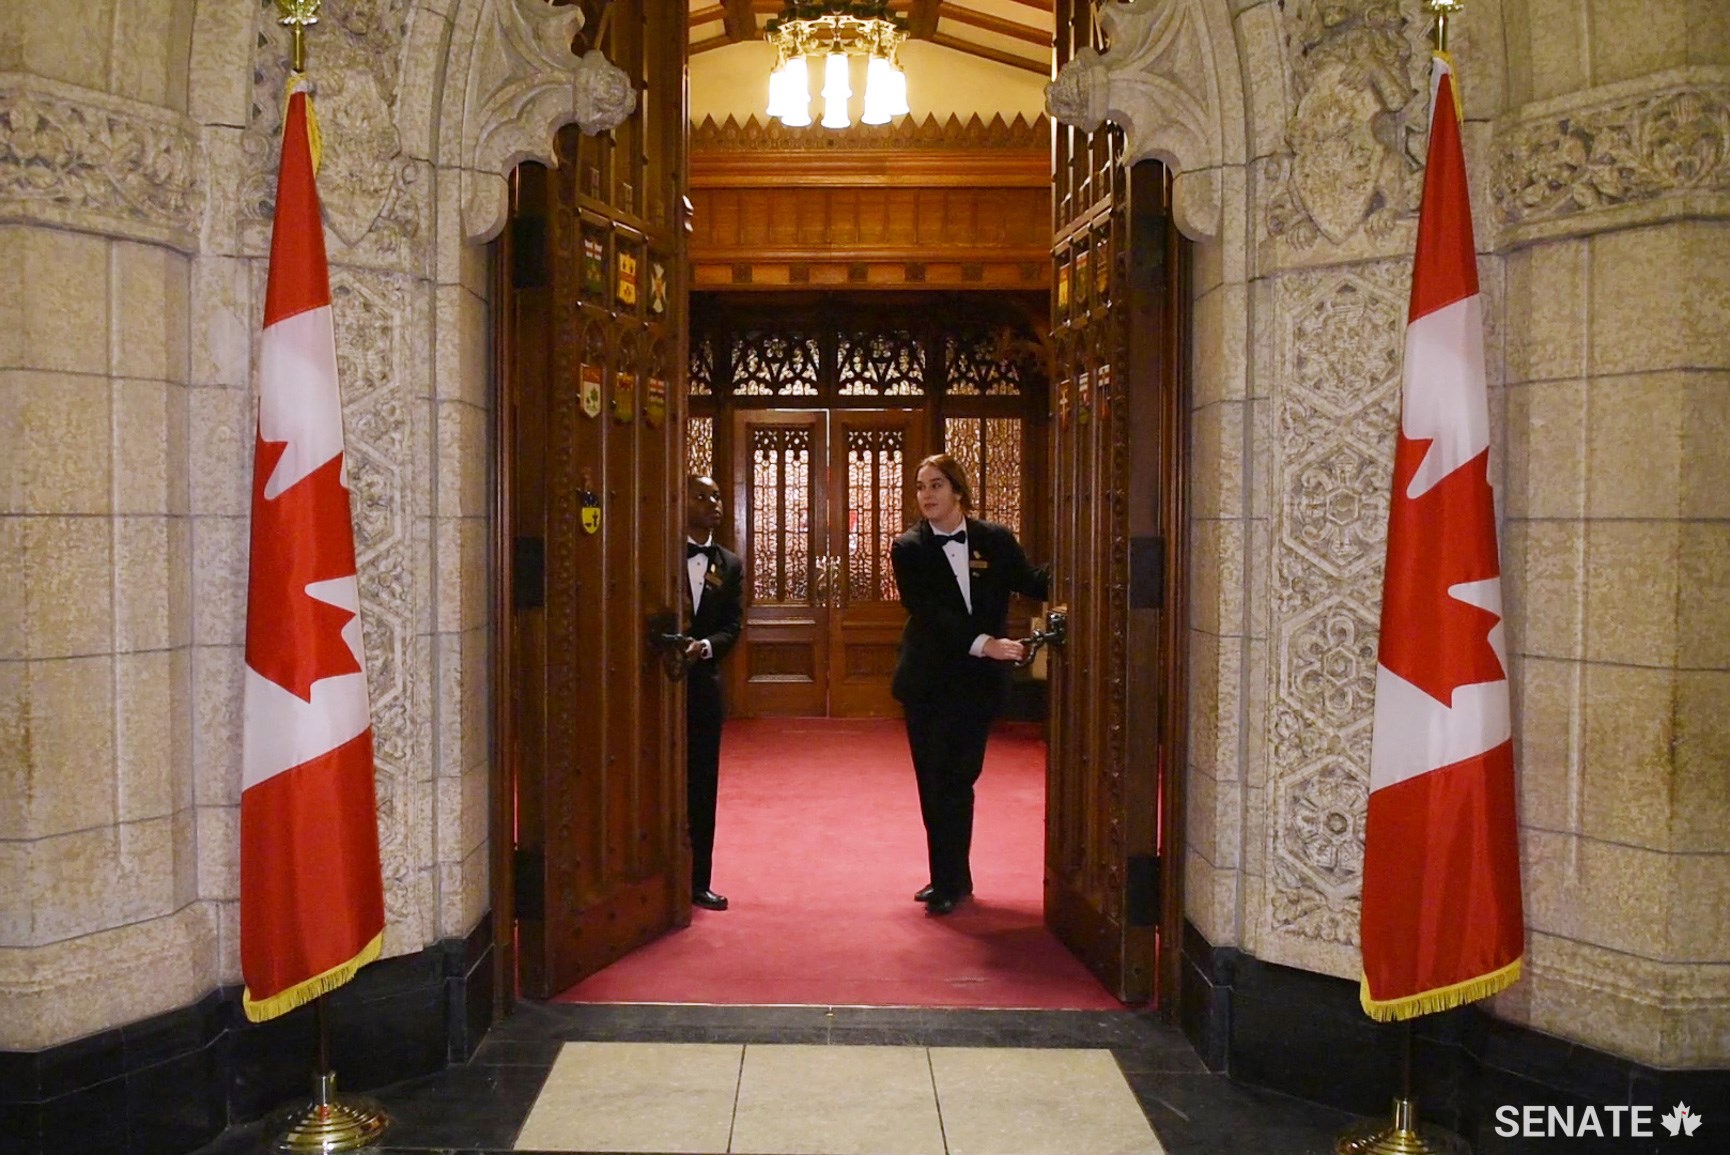 Senate pages shut the doors to the Red Chamber for the last time for at least a decade. The Senate will return to Centre Block after a top-to-bottom overhaul of the building is completed.